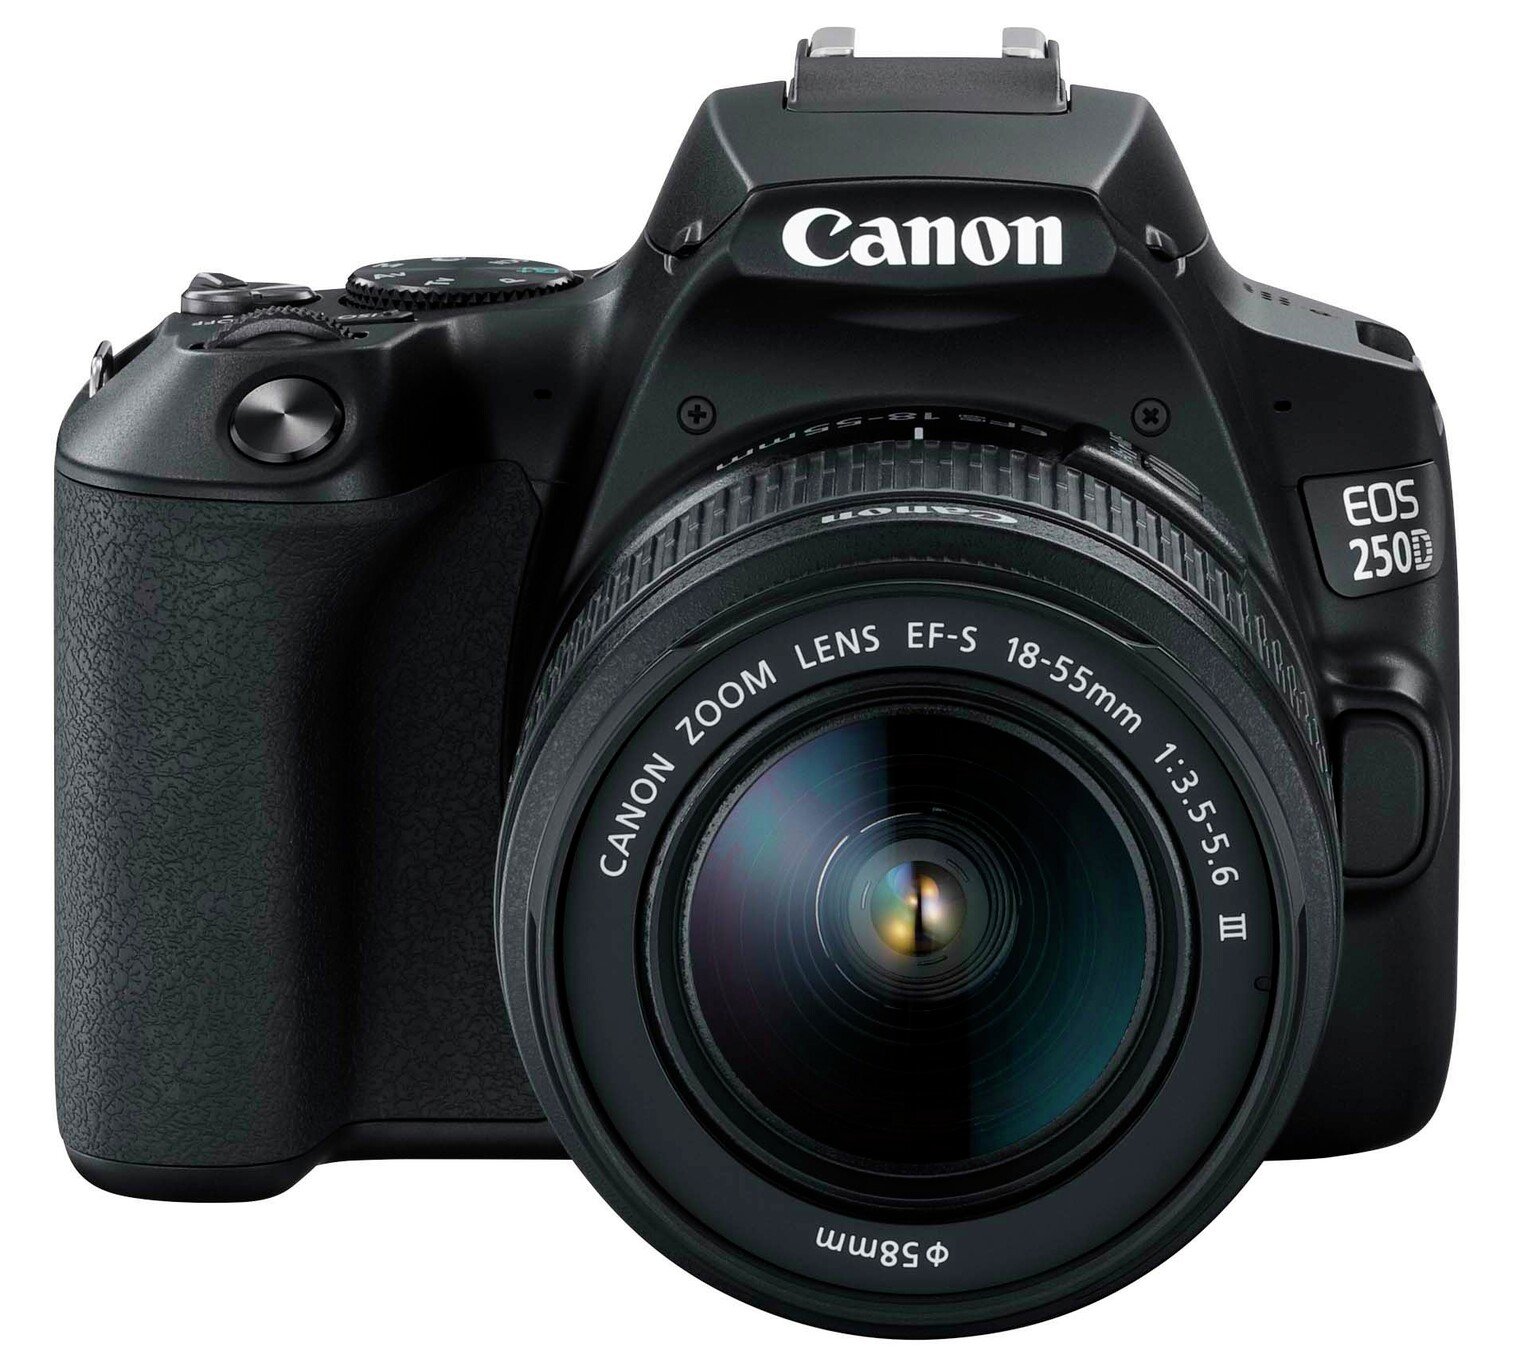 Canon EOS 250D DSLR Camera Body with 18-55mm DC Lens Review